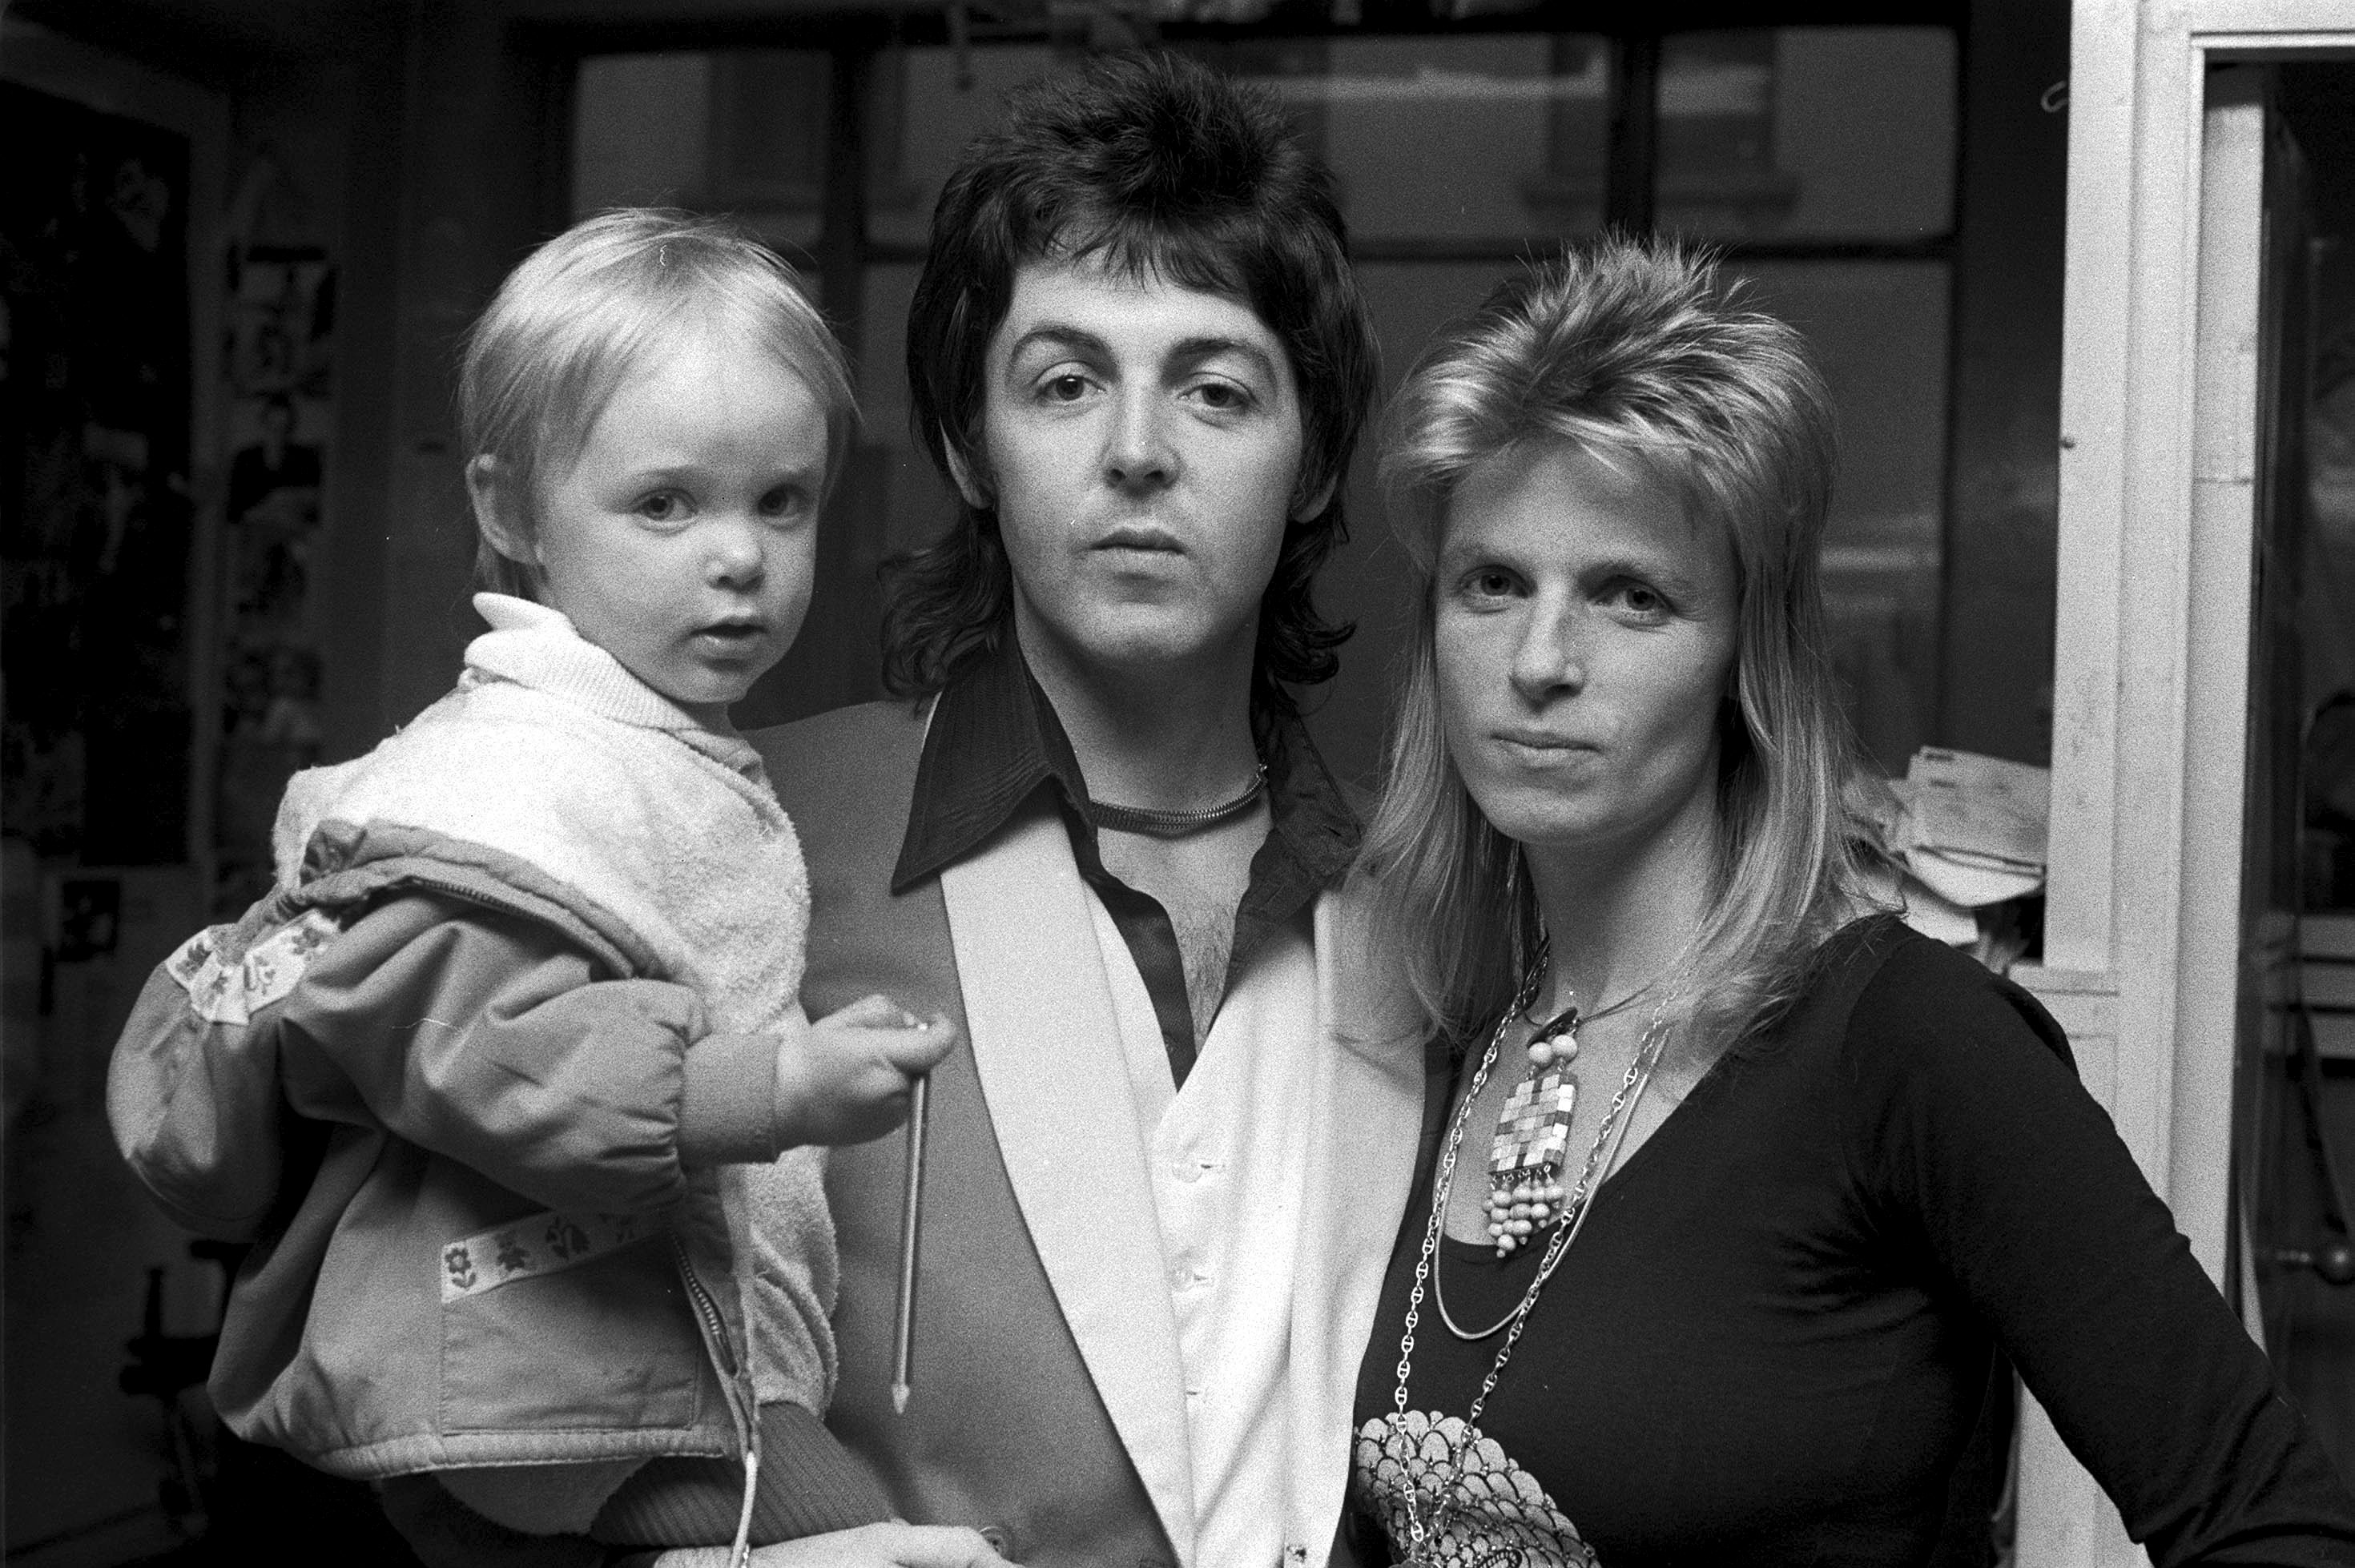 Paul McCartney holding baby Stella McCartney while Linda McCartney stands to his right